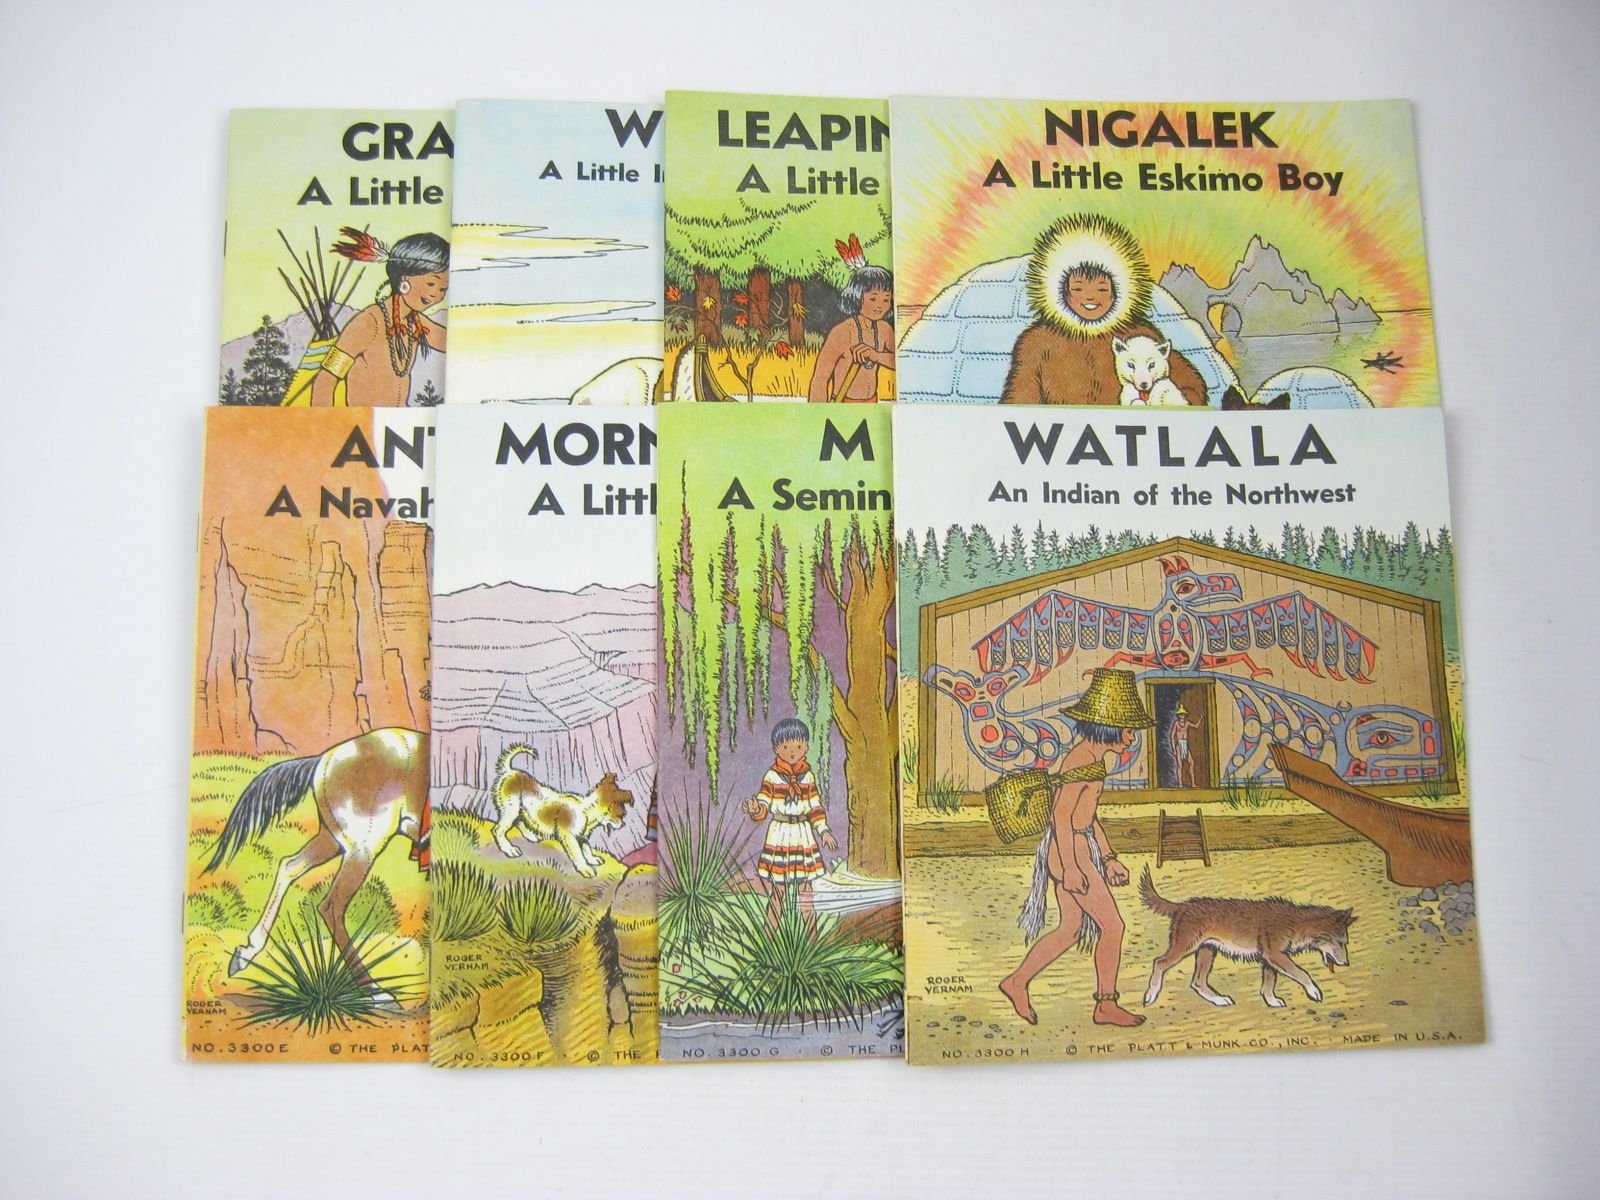 Photo of MY INDIAN TALE LIBRARY illustrated by Vernam, Roger published by The Platt And Munk Co. Inc. (STOCK CODE: 1502910)  for sale by Stella & Rose's Books